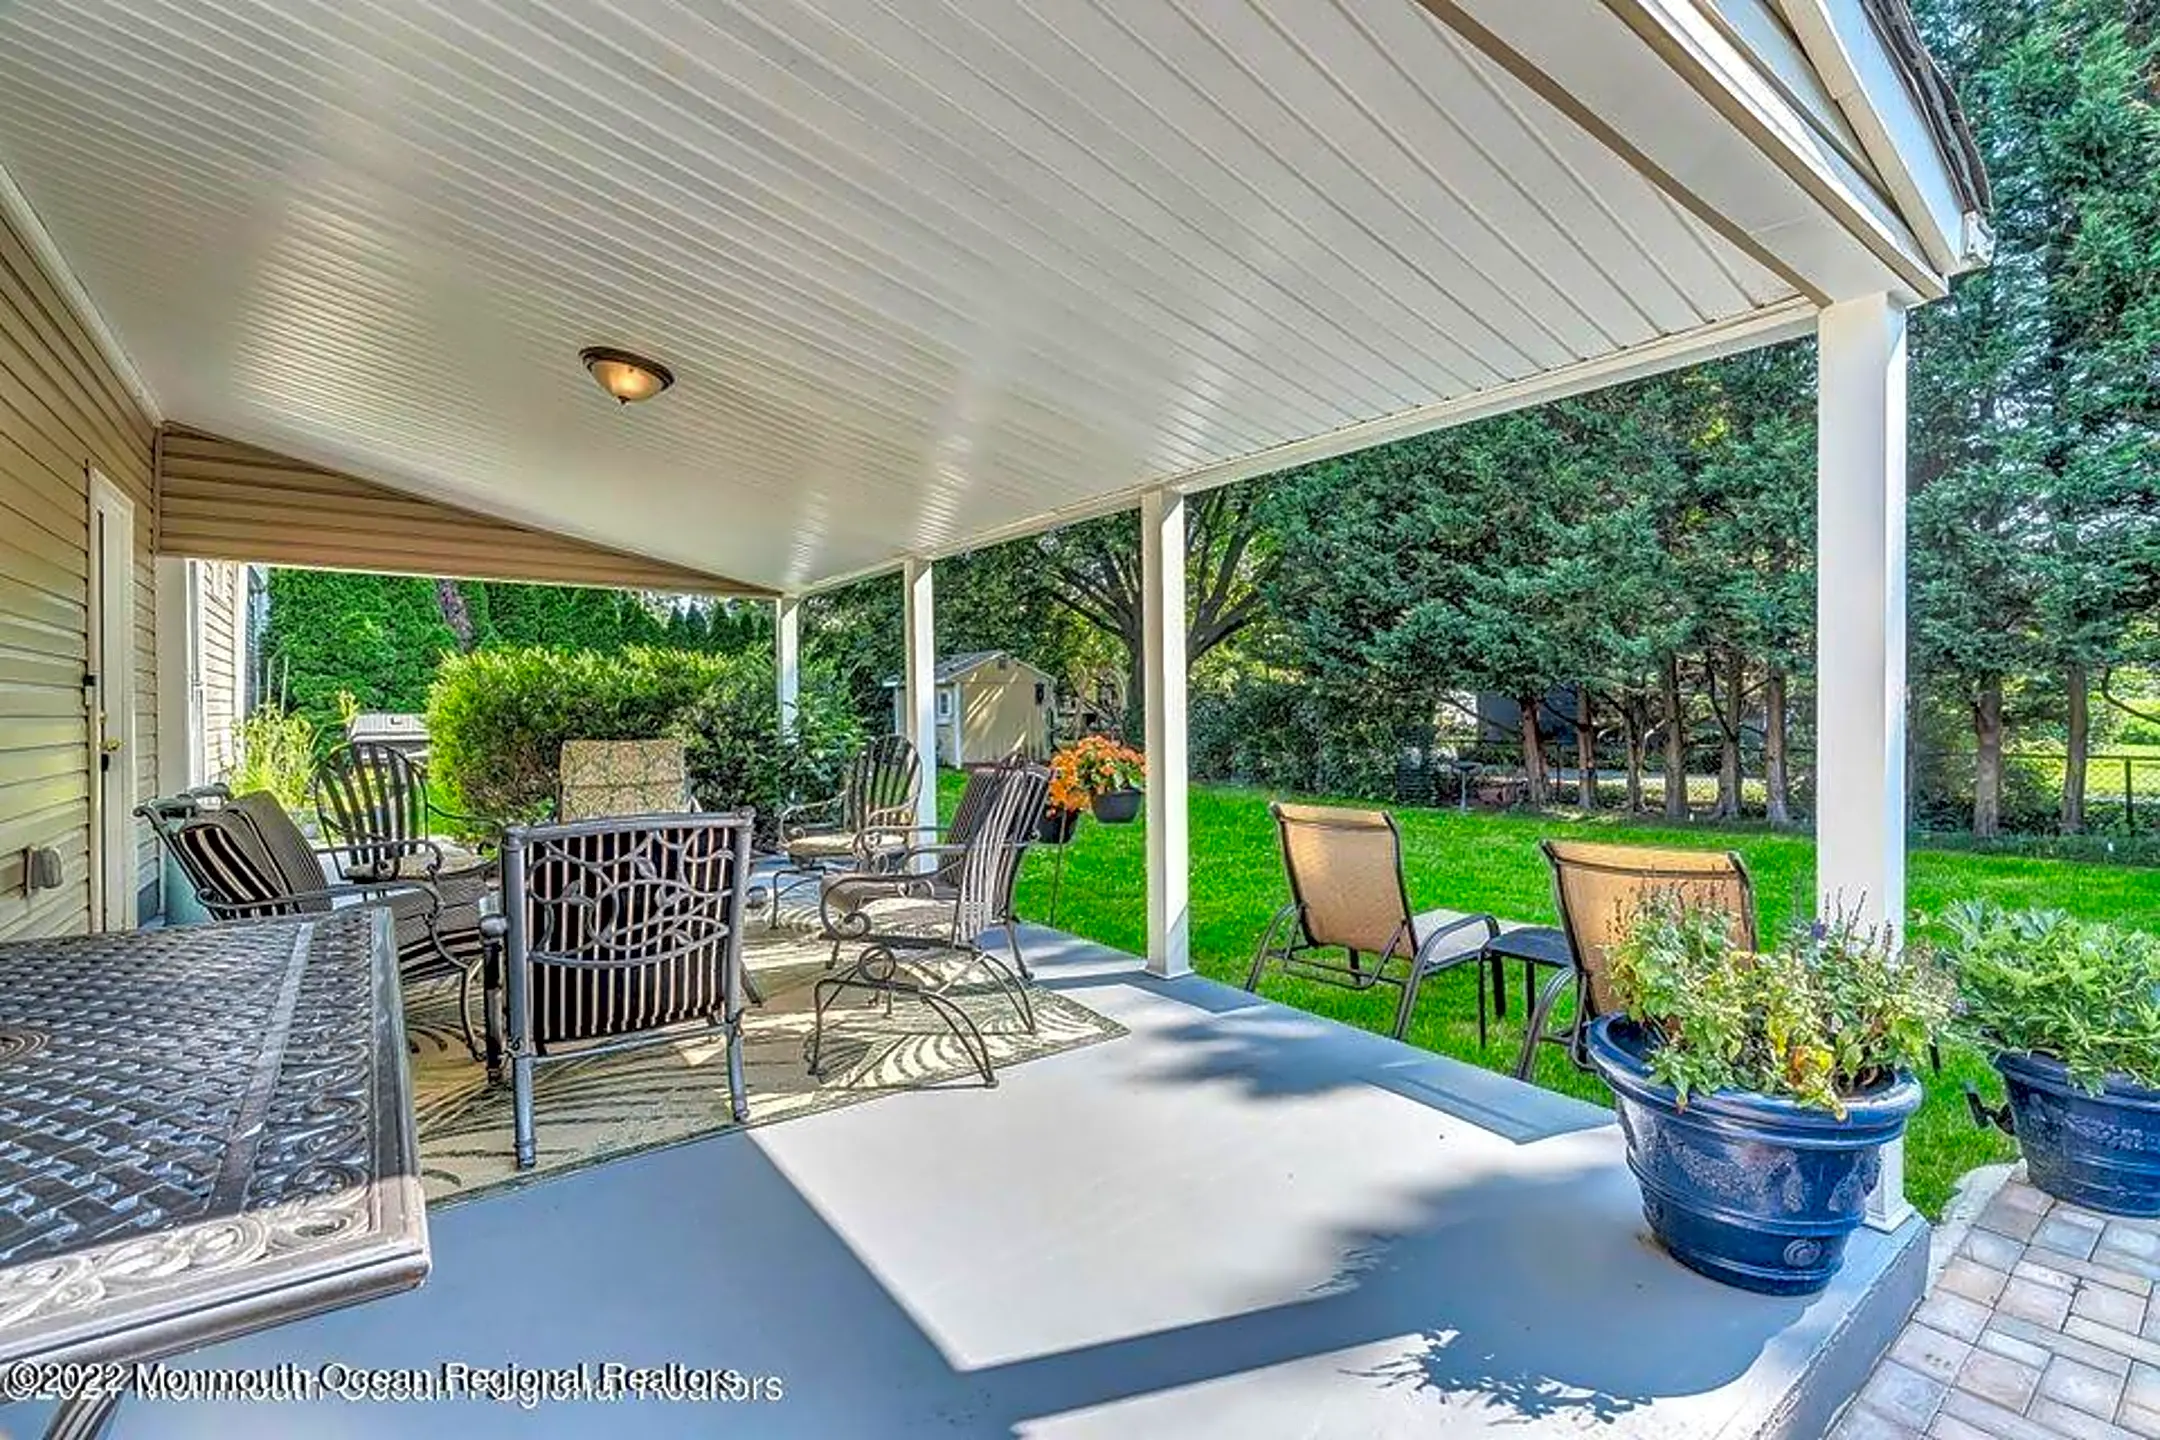 Patio / Deck - 428 Monmouth Rd - West Long Branch, NJ